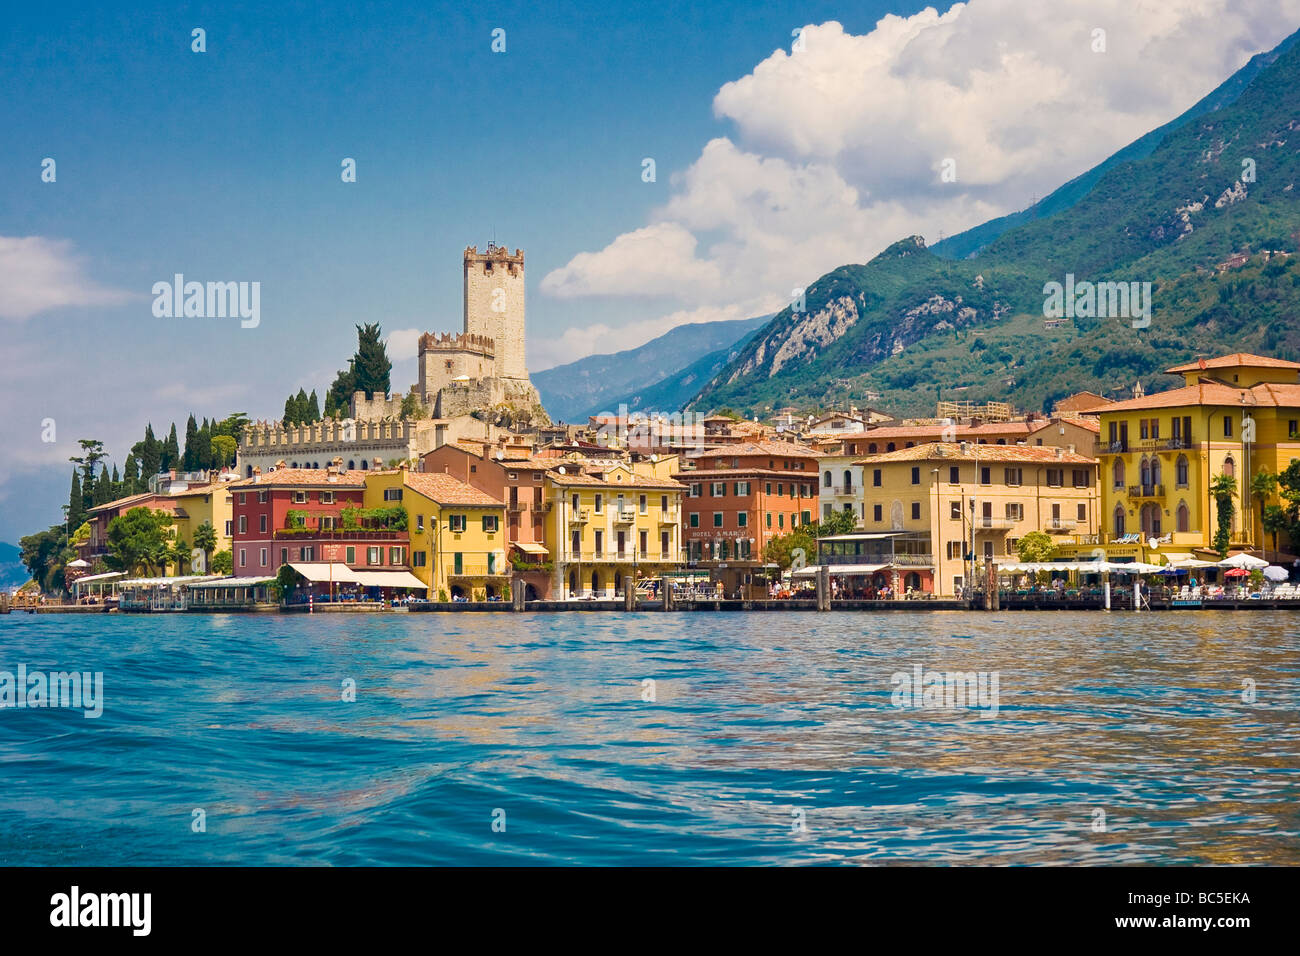 Malcesine, viewed from the Lake. A pretty town on the eastern shore of Lake Garda, one of the Great Italian Lakes. Stock Photo